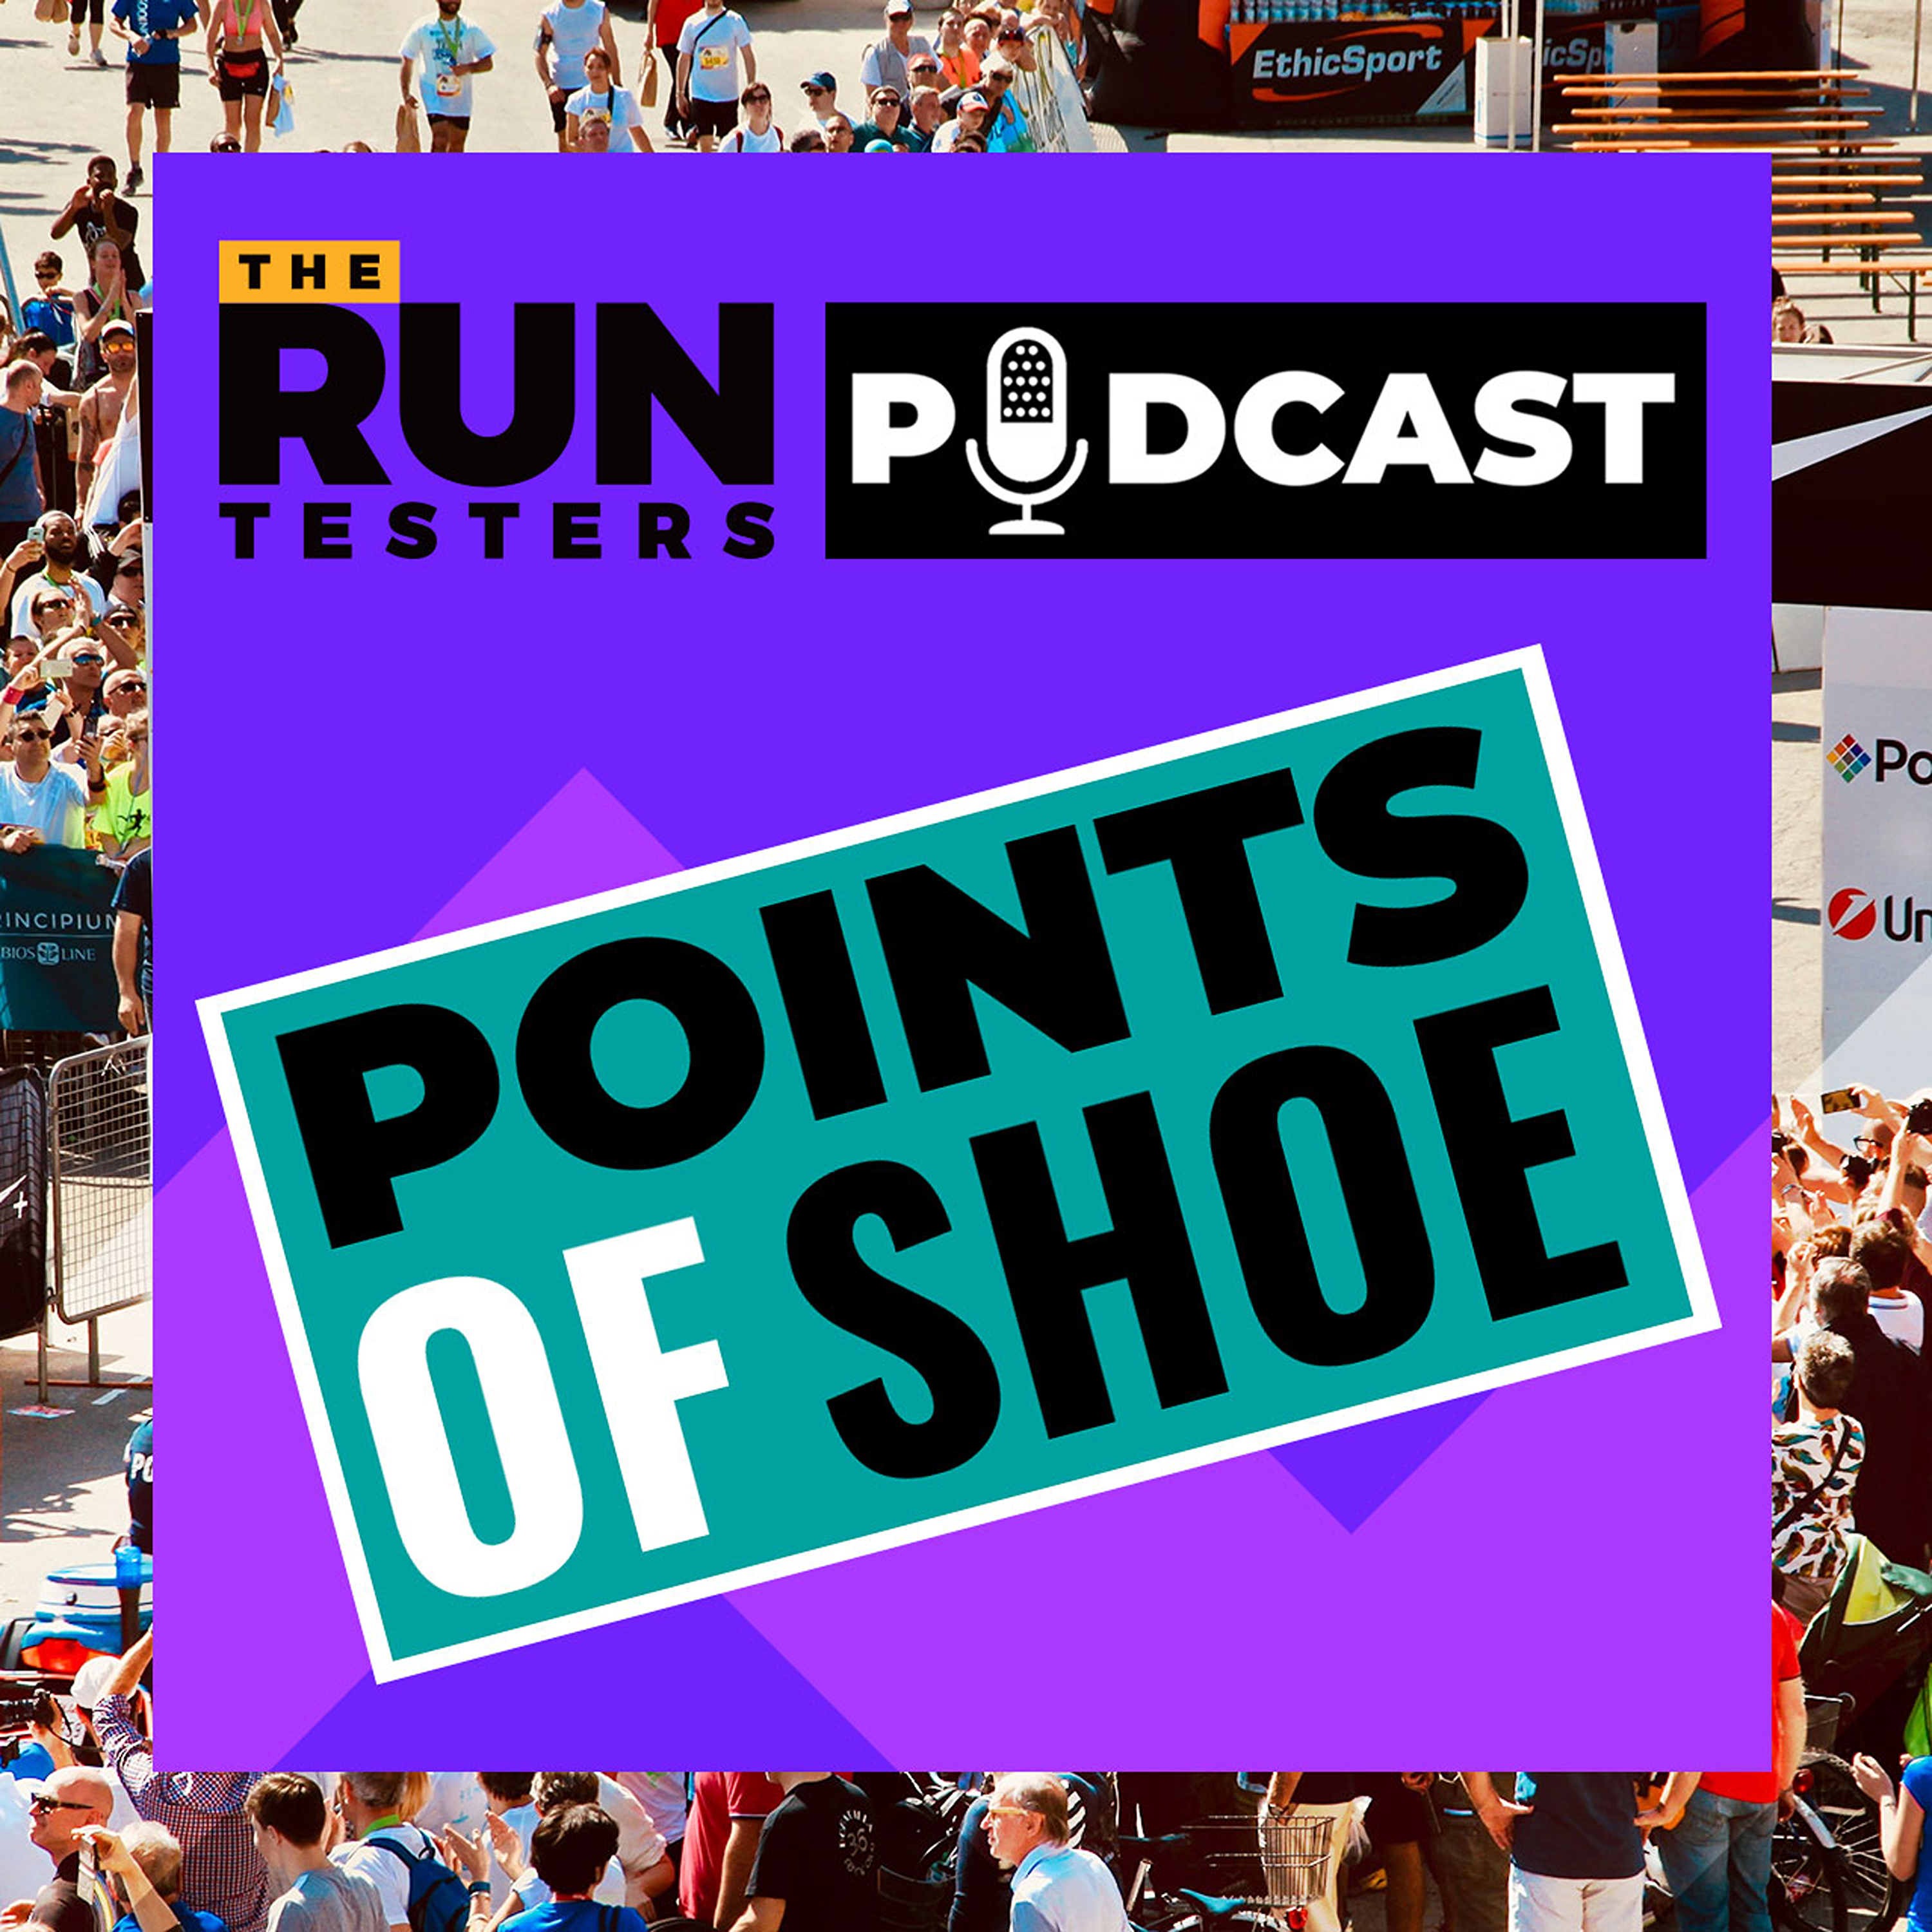 Running Shoe Questions Answered: Points of Shoe Episode 6